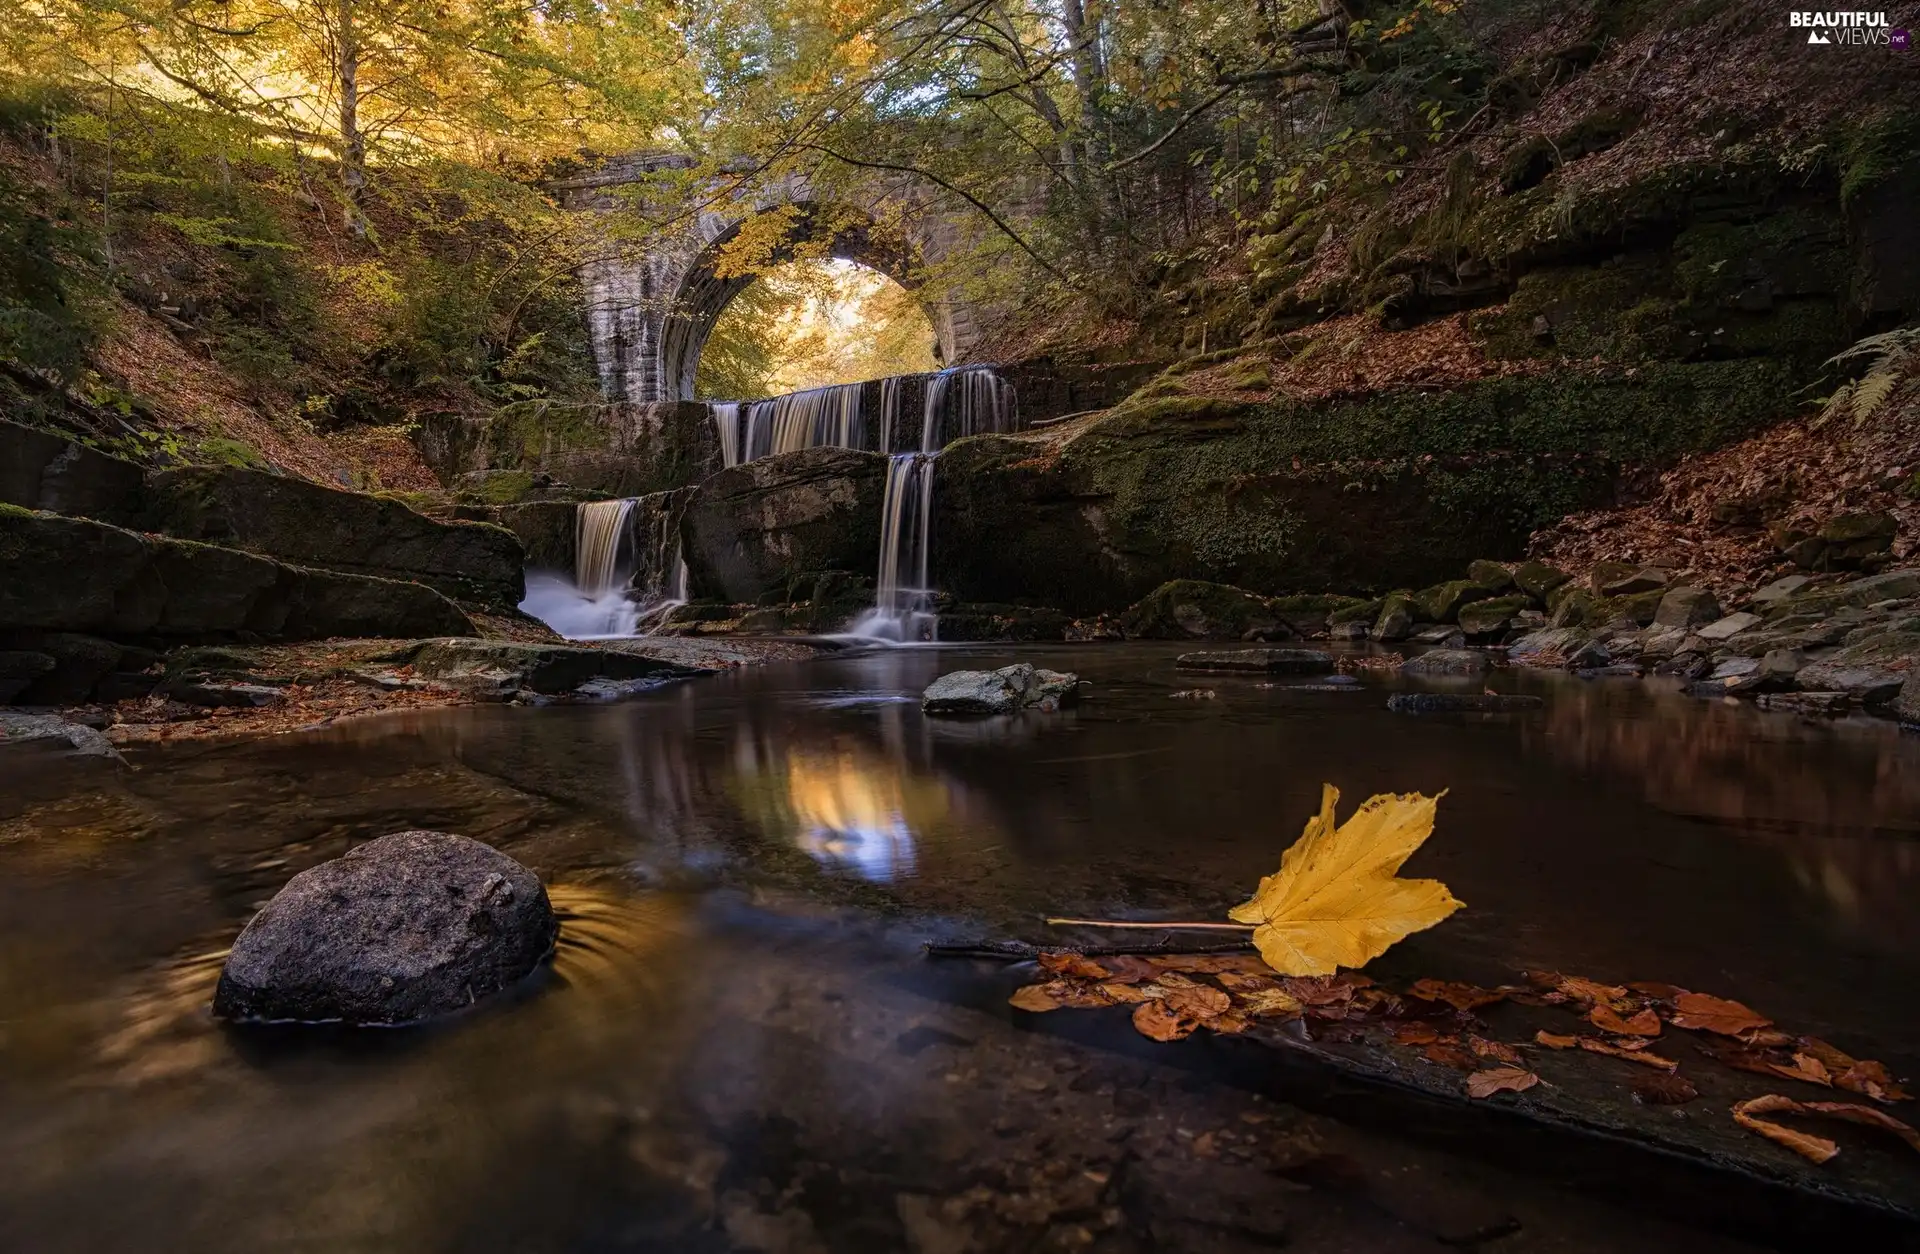 viewes, autumn, waterfall, River, stone, leaf, Stones, trees, forest, bridge, rocks